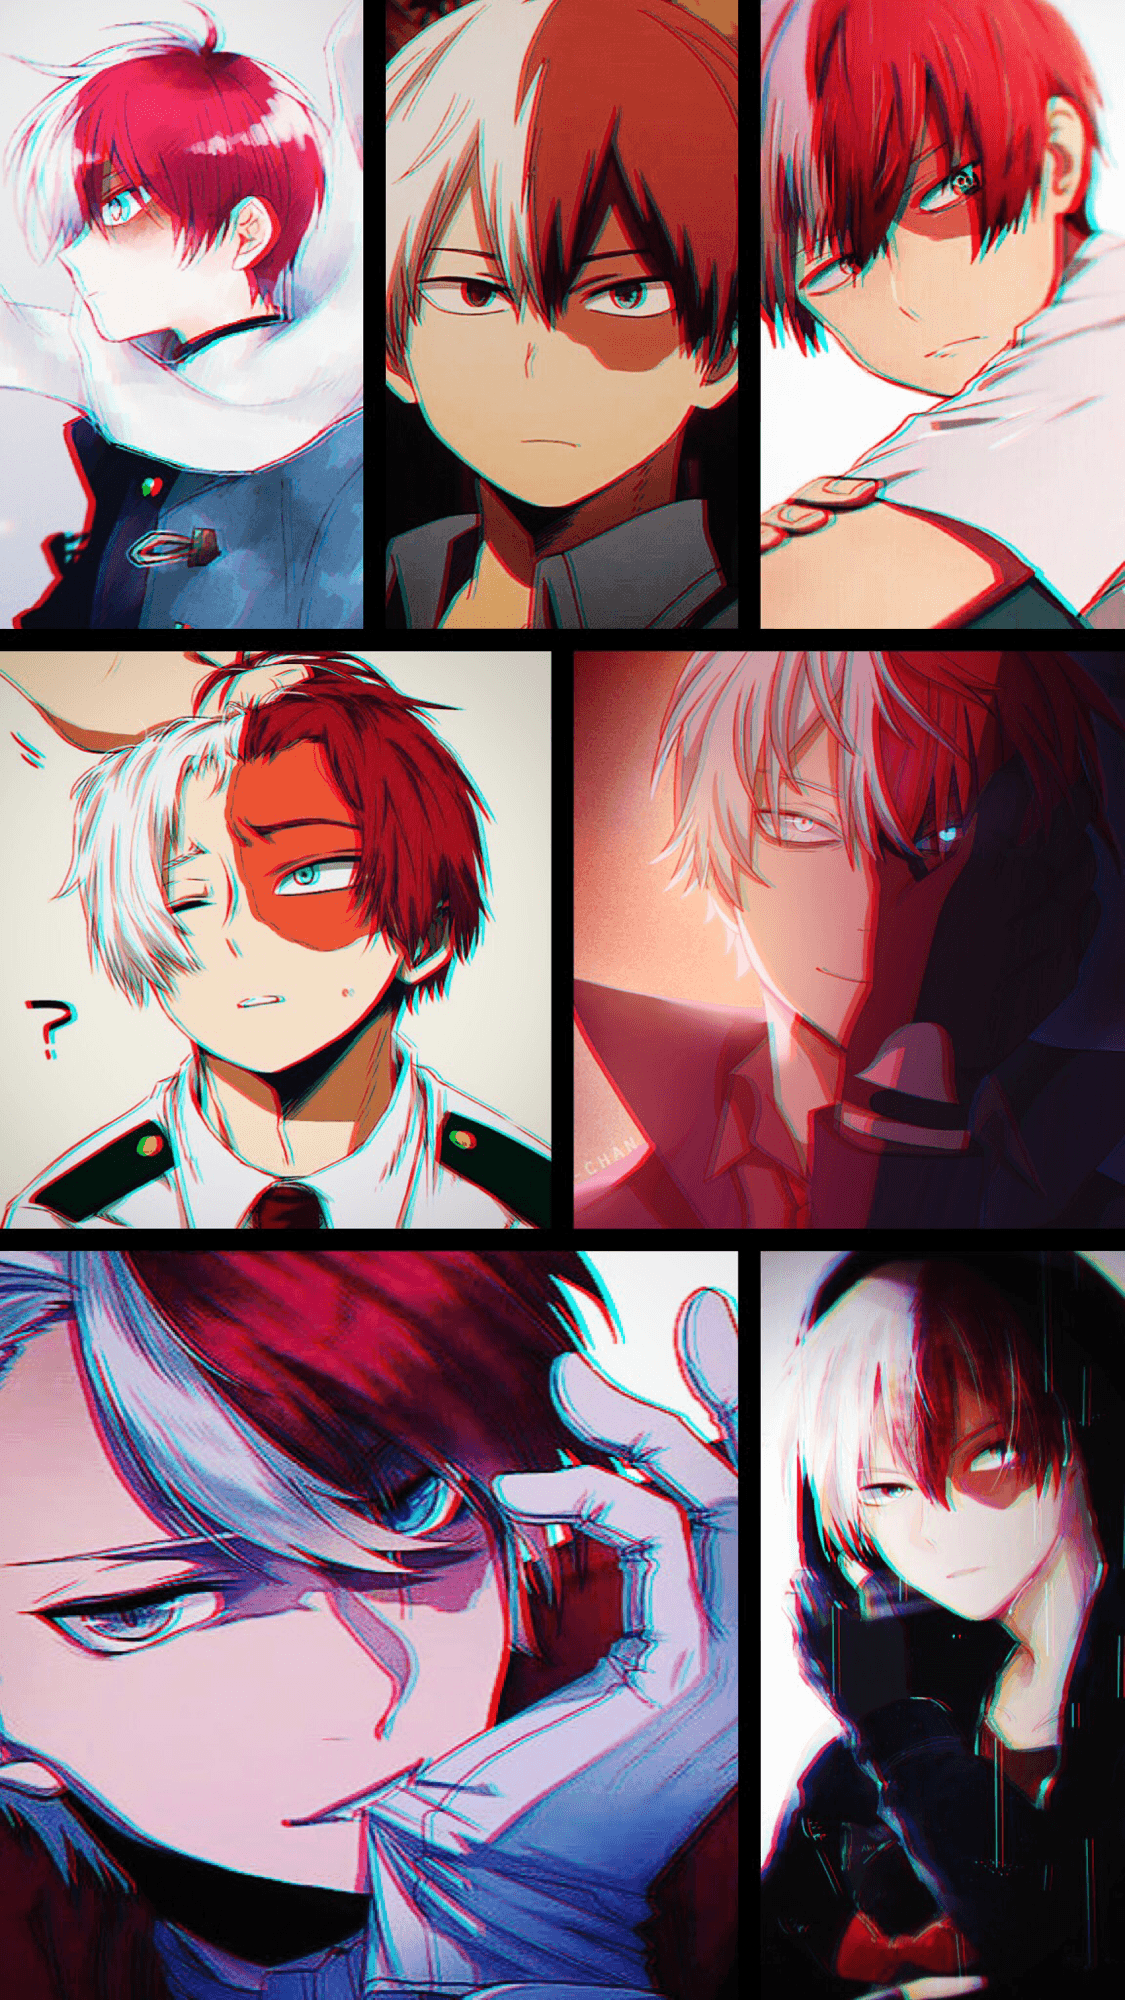 86 Shoto Todoroki Wallpapers for iPhone and Android by Robert Berry